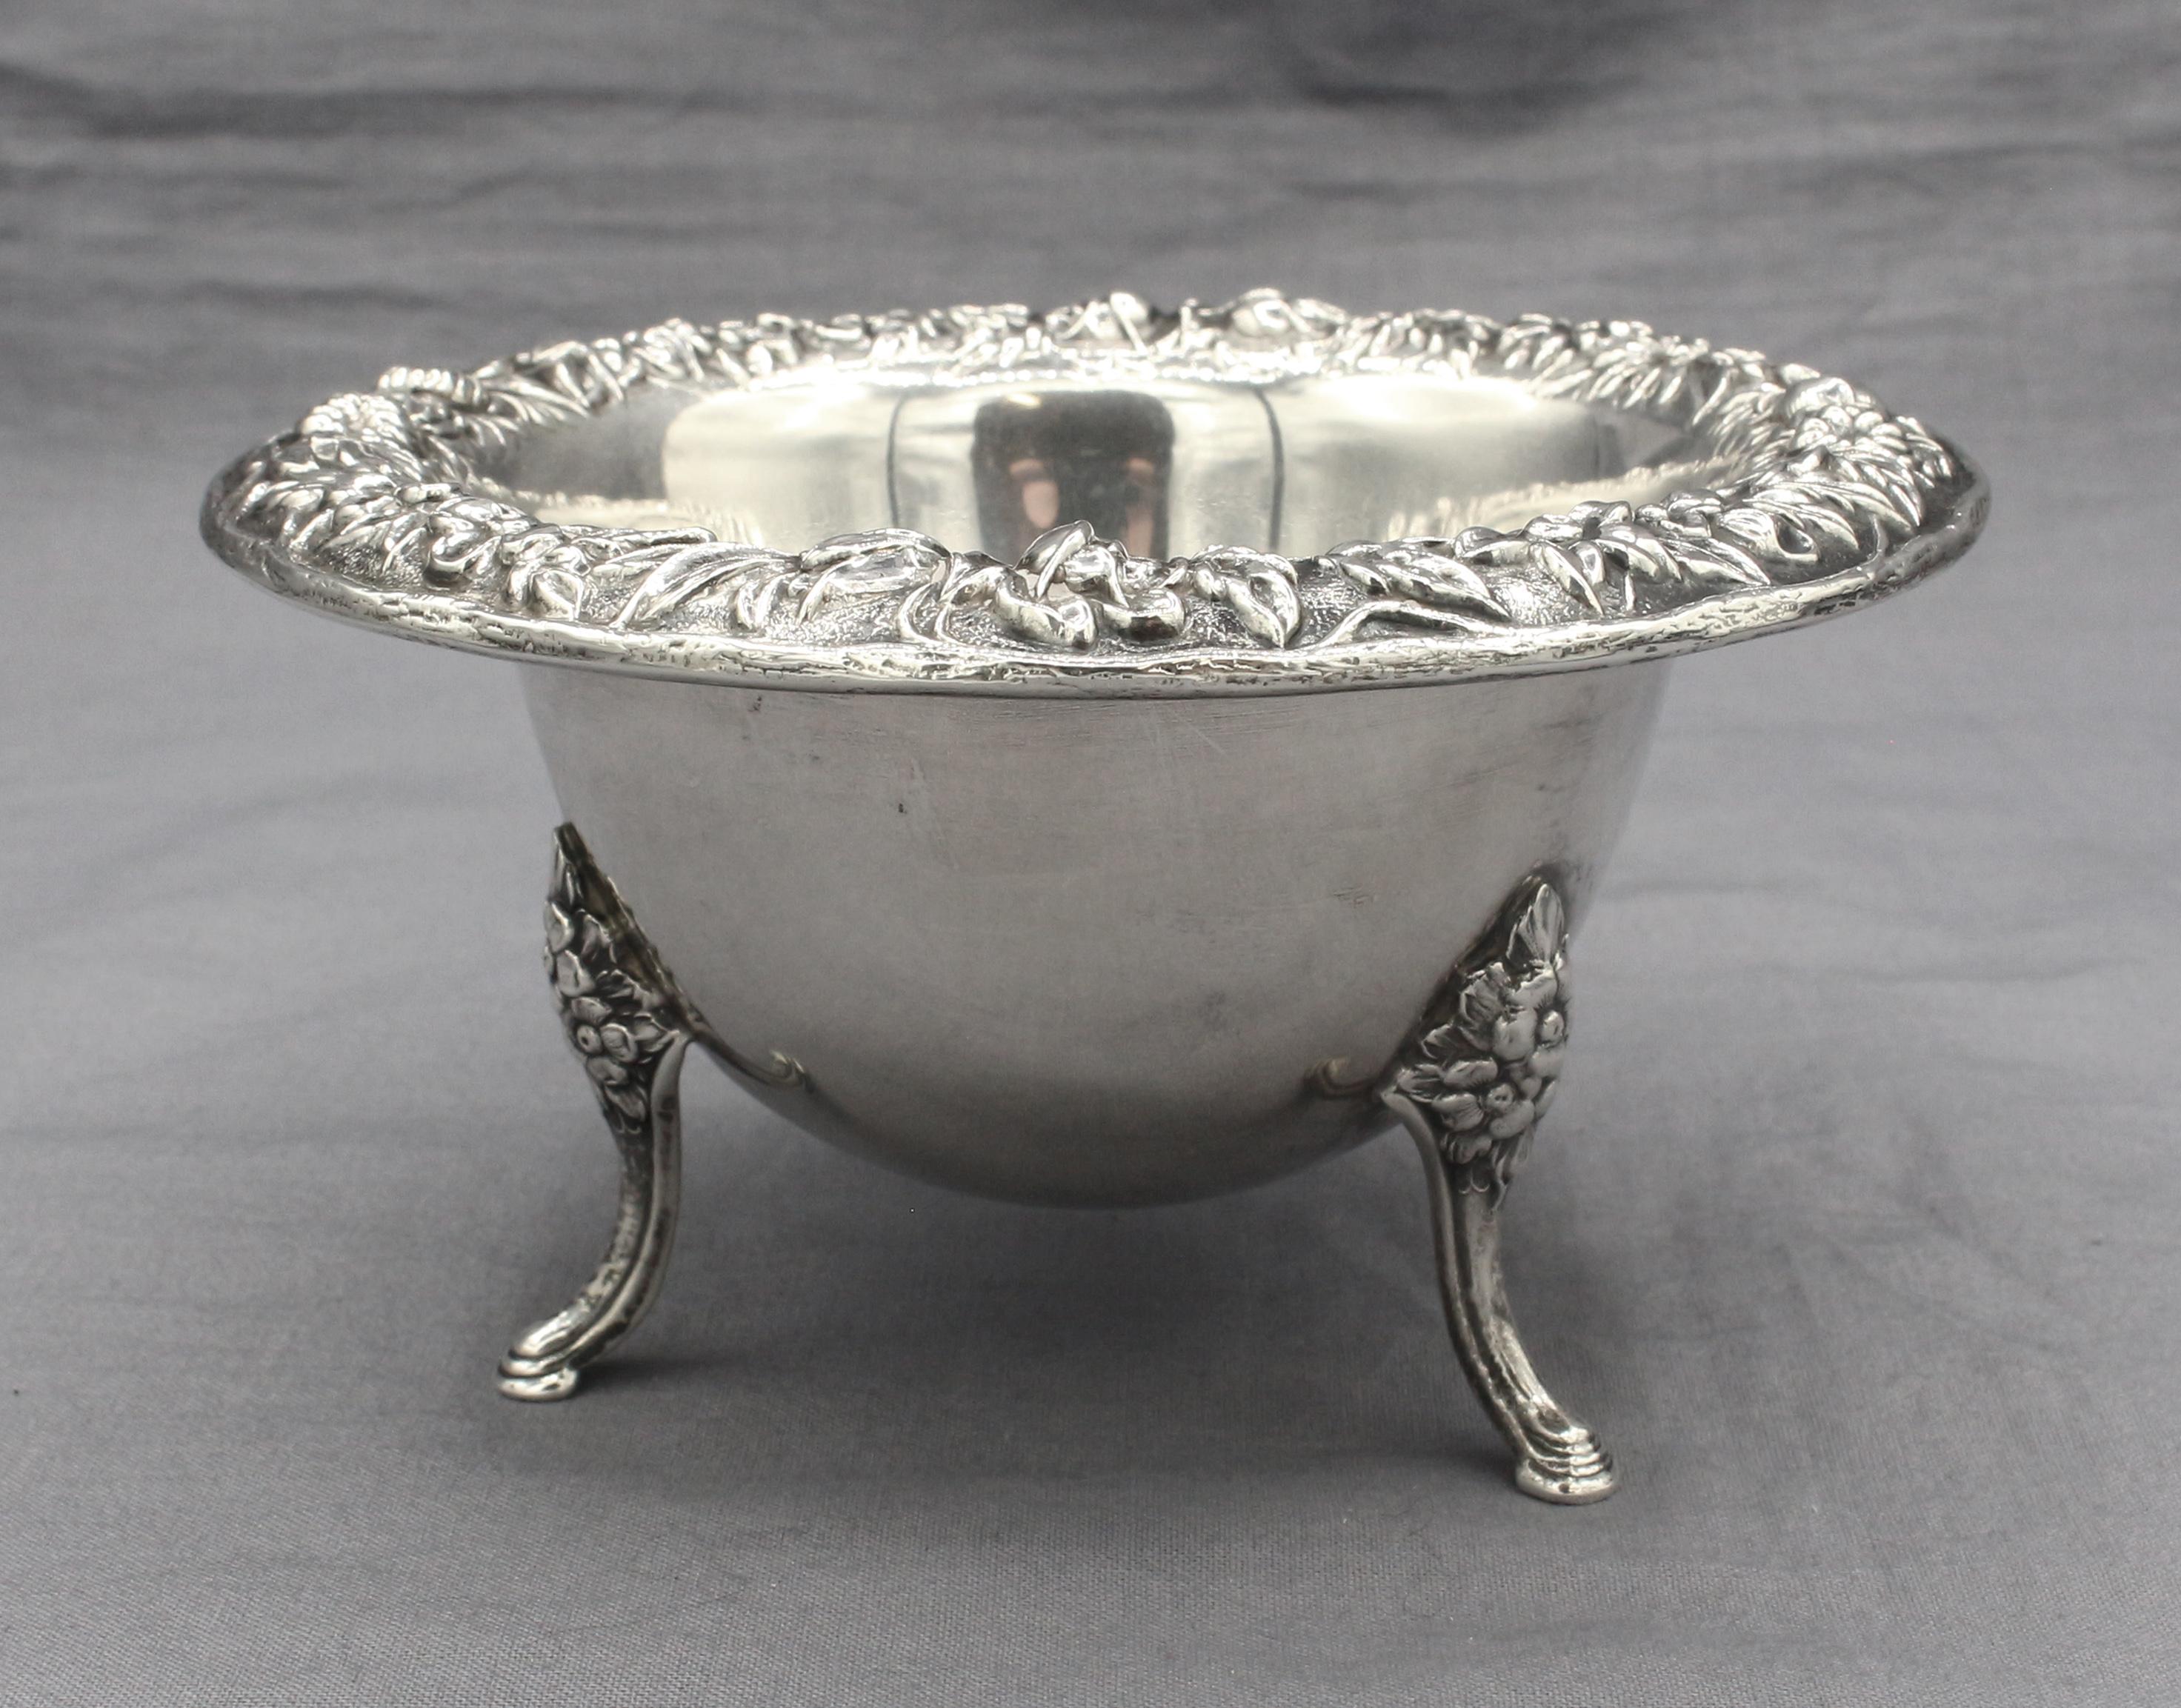 A sterling open sugar bowl, 1903-1924 mark, by S. Kirk & Son, Inc. Repousse rim & knees. Molded hoof feet. 4.95 troy oz.
5 1/8